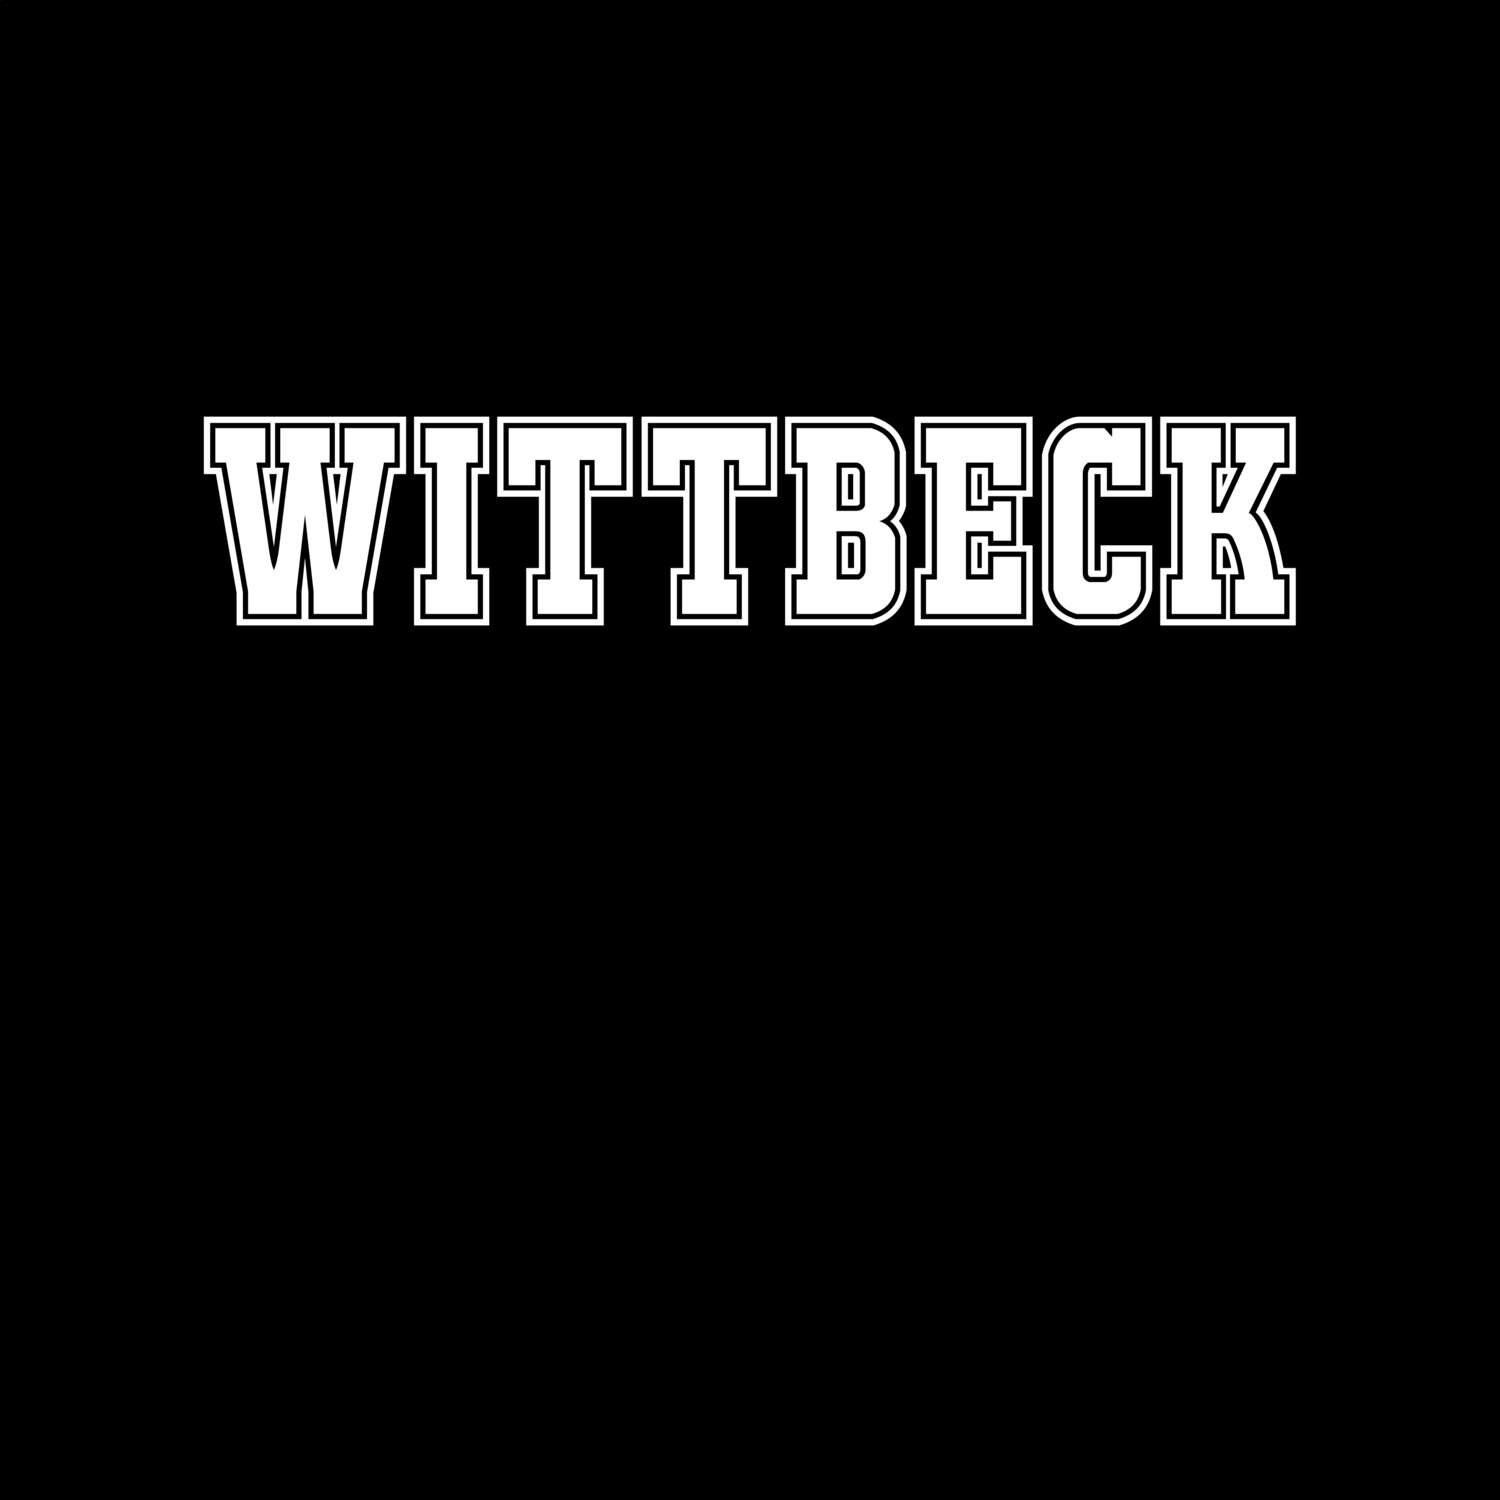 Wittbeck T-Shirt »Classic«